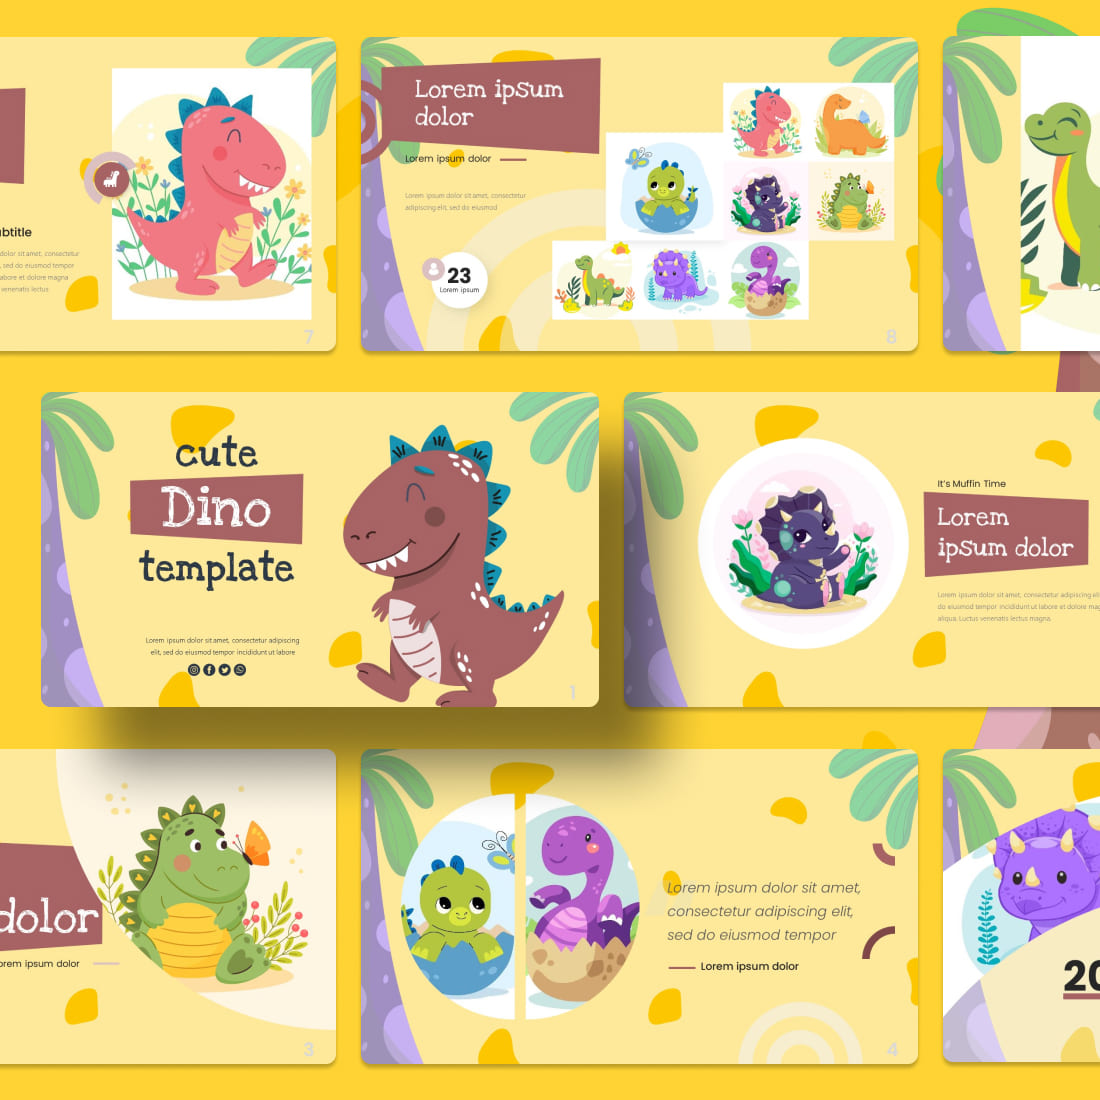 Cute Dino Powerpoint Template cover.